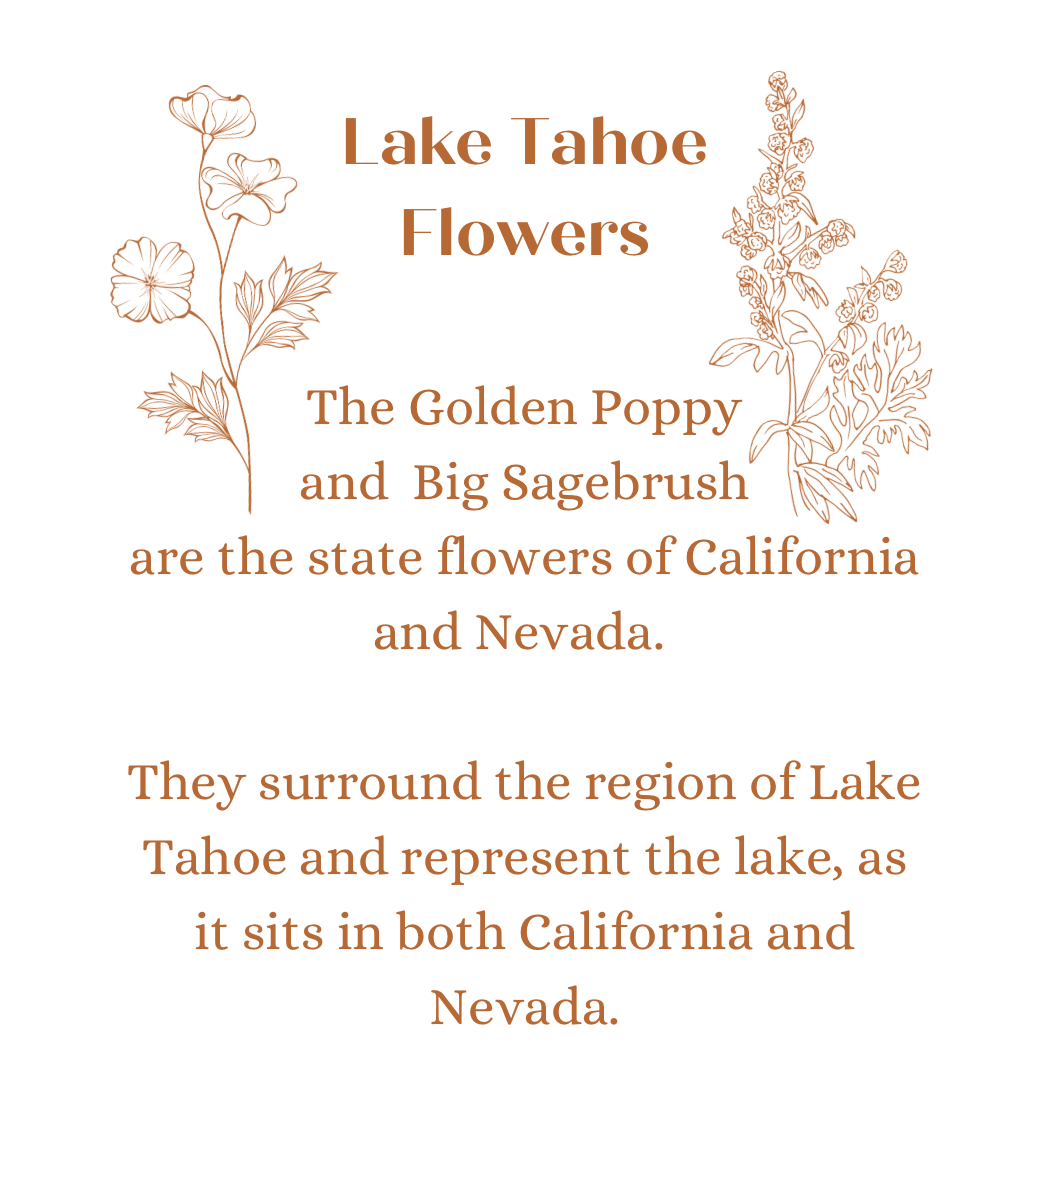 Lake Tahoe Flowers in Theia Gold